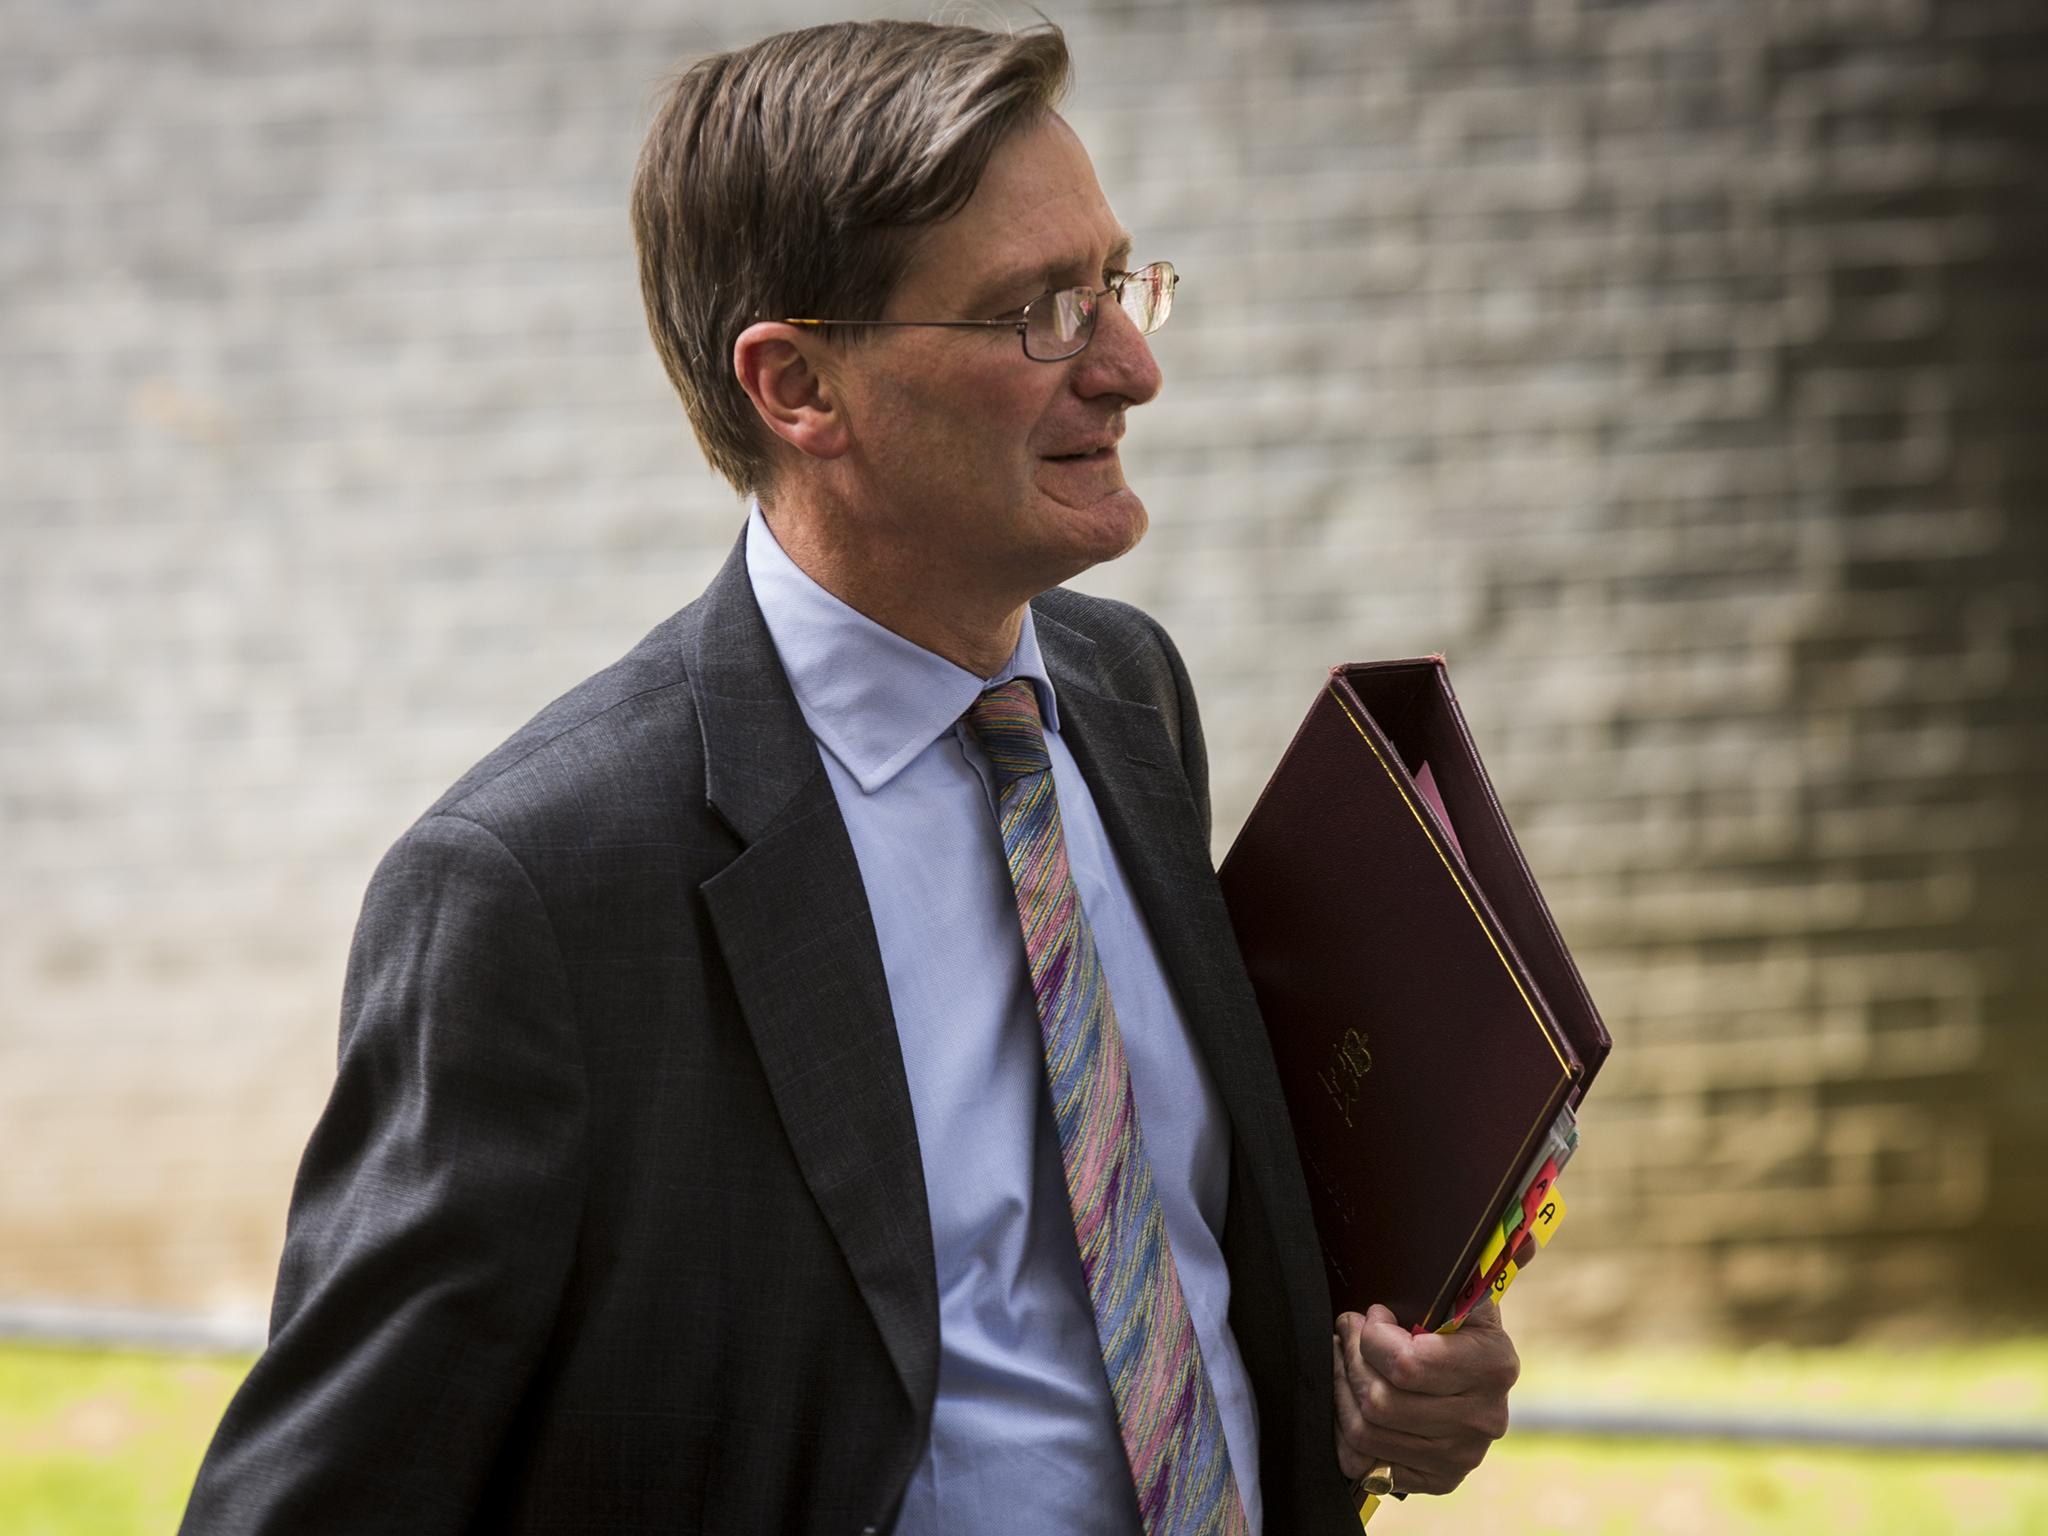 Dominic Grieve, former Attorney General, urged the Prime Minister to back down and give Parliament a binding say on final Brexit deal